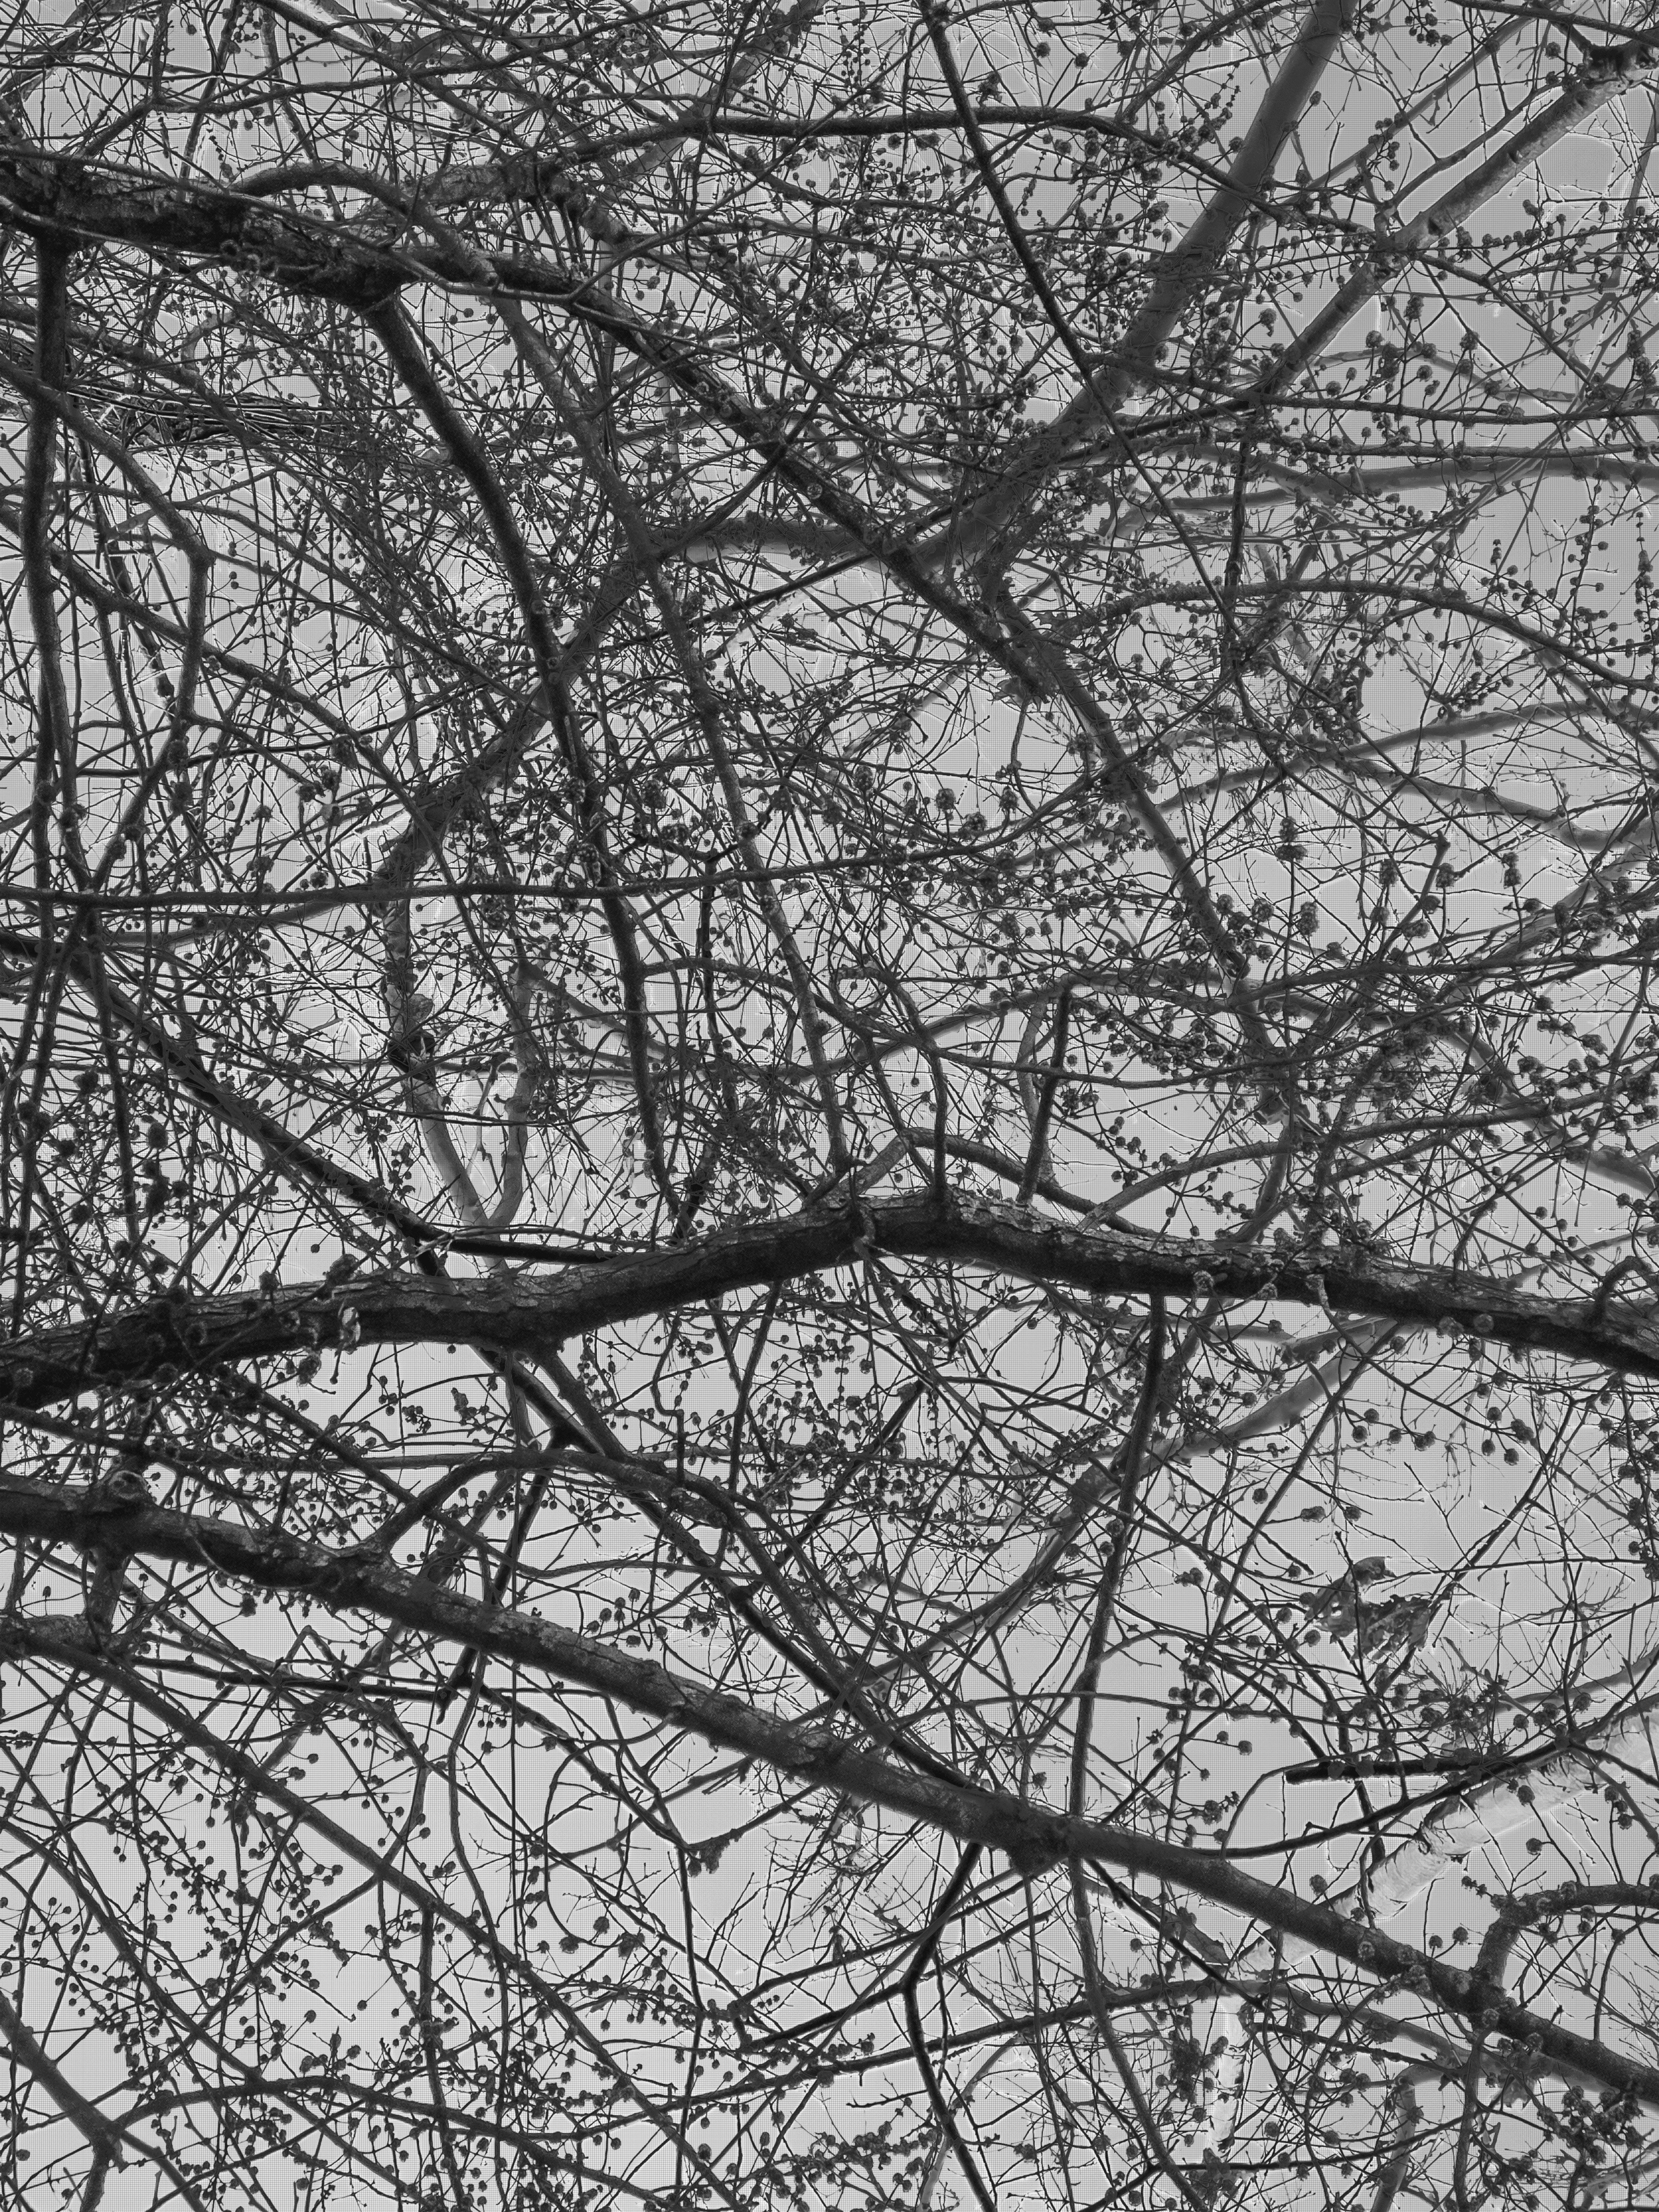 MATTHEW SWARTS BRANCHES img 9097 1a2g